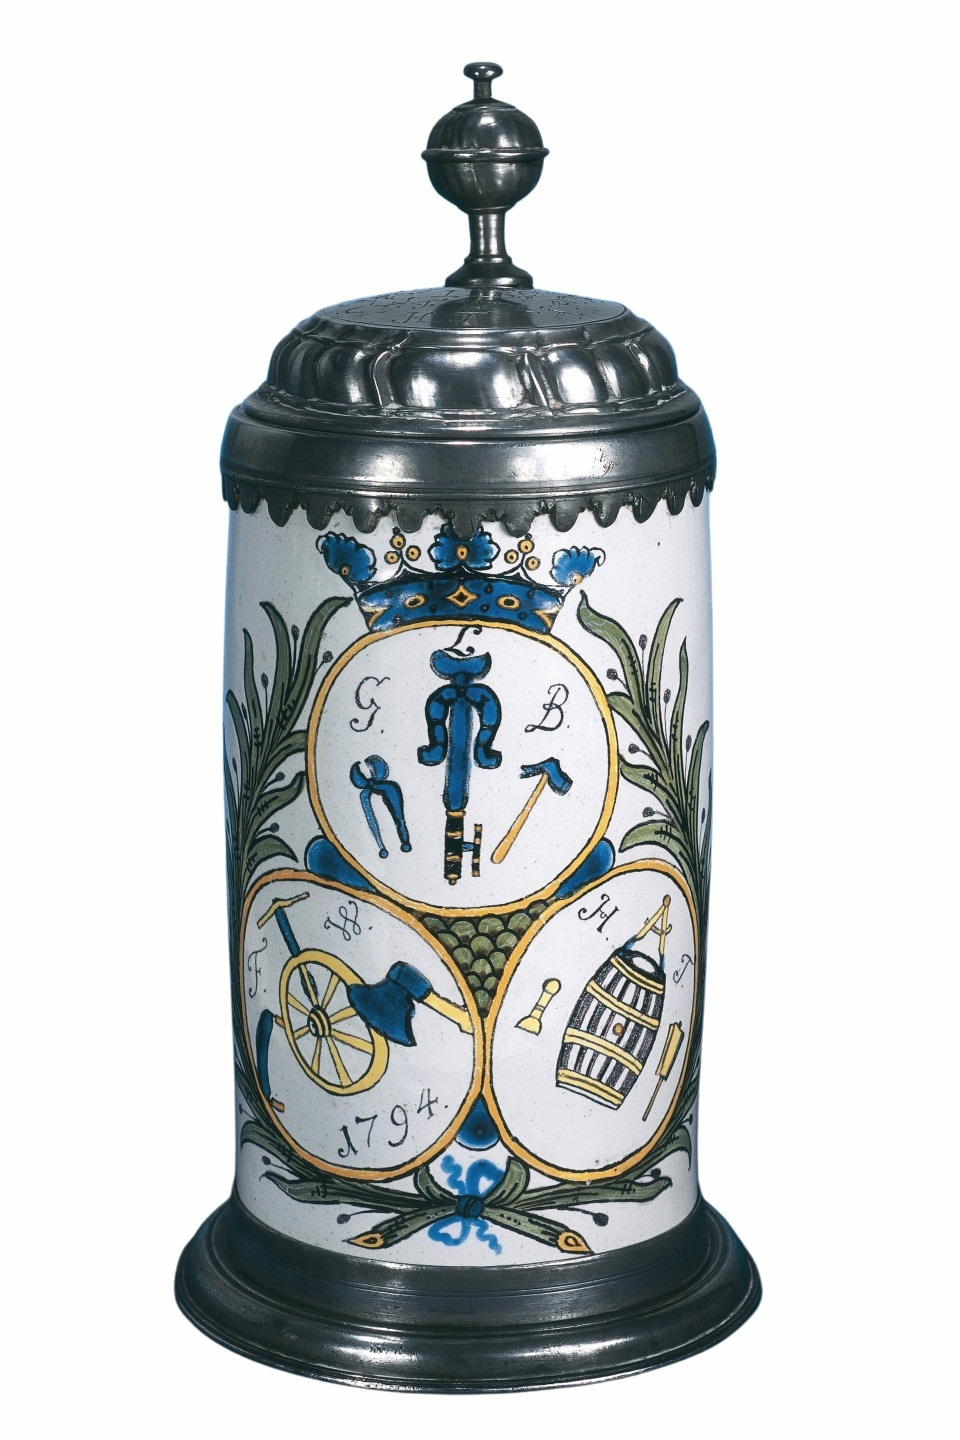 bayreuth-faience-guild-tankard-dated-1794